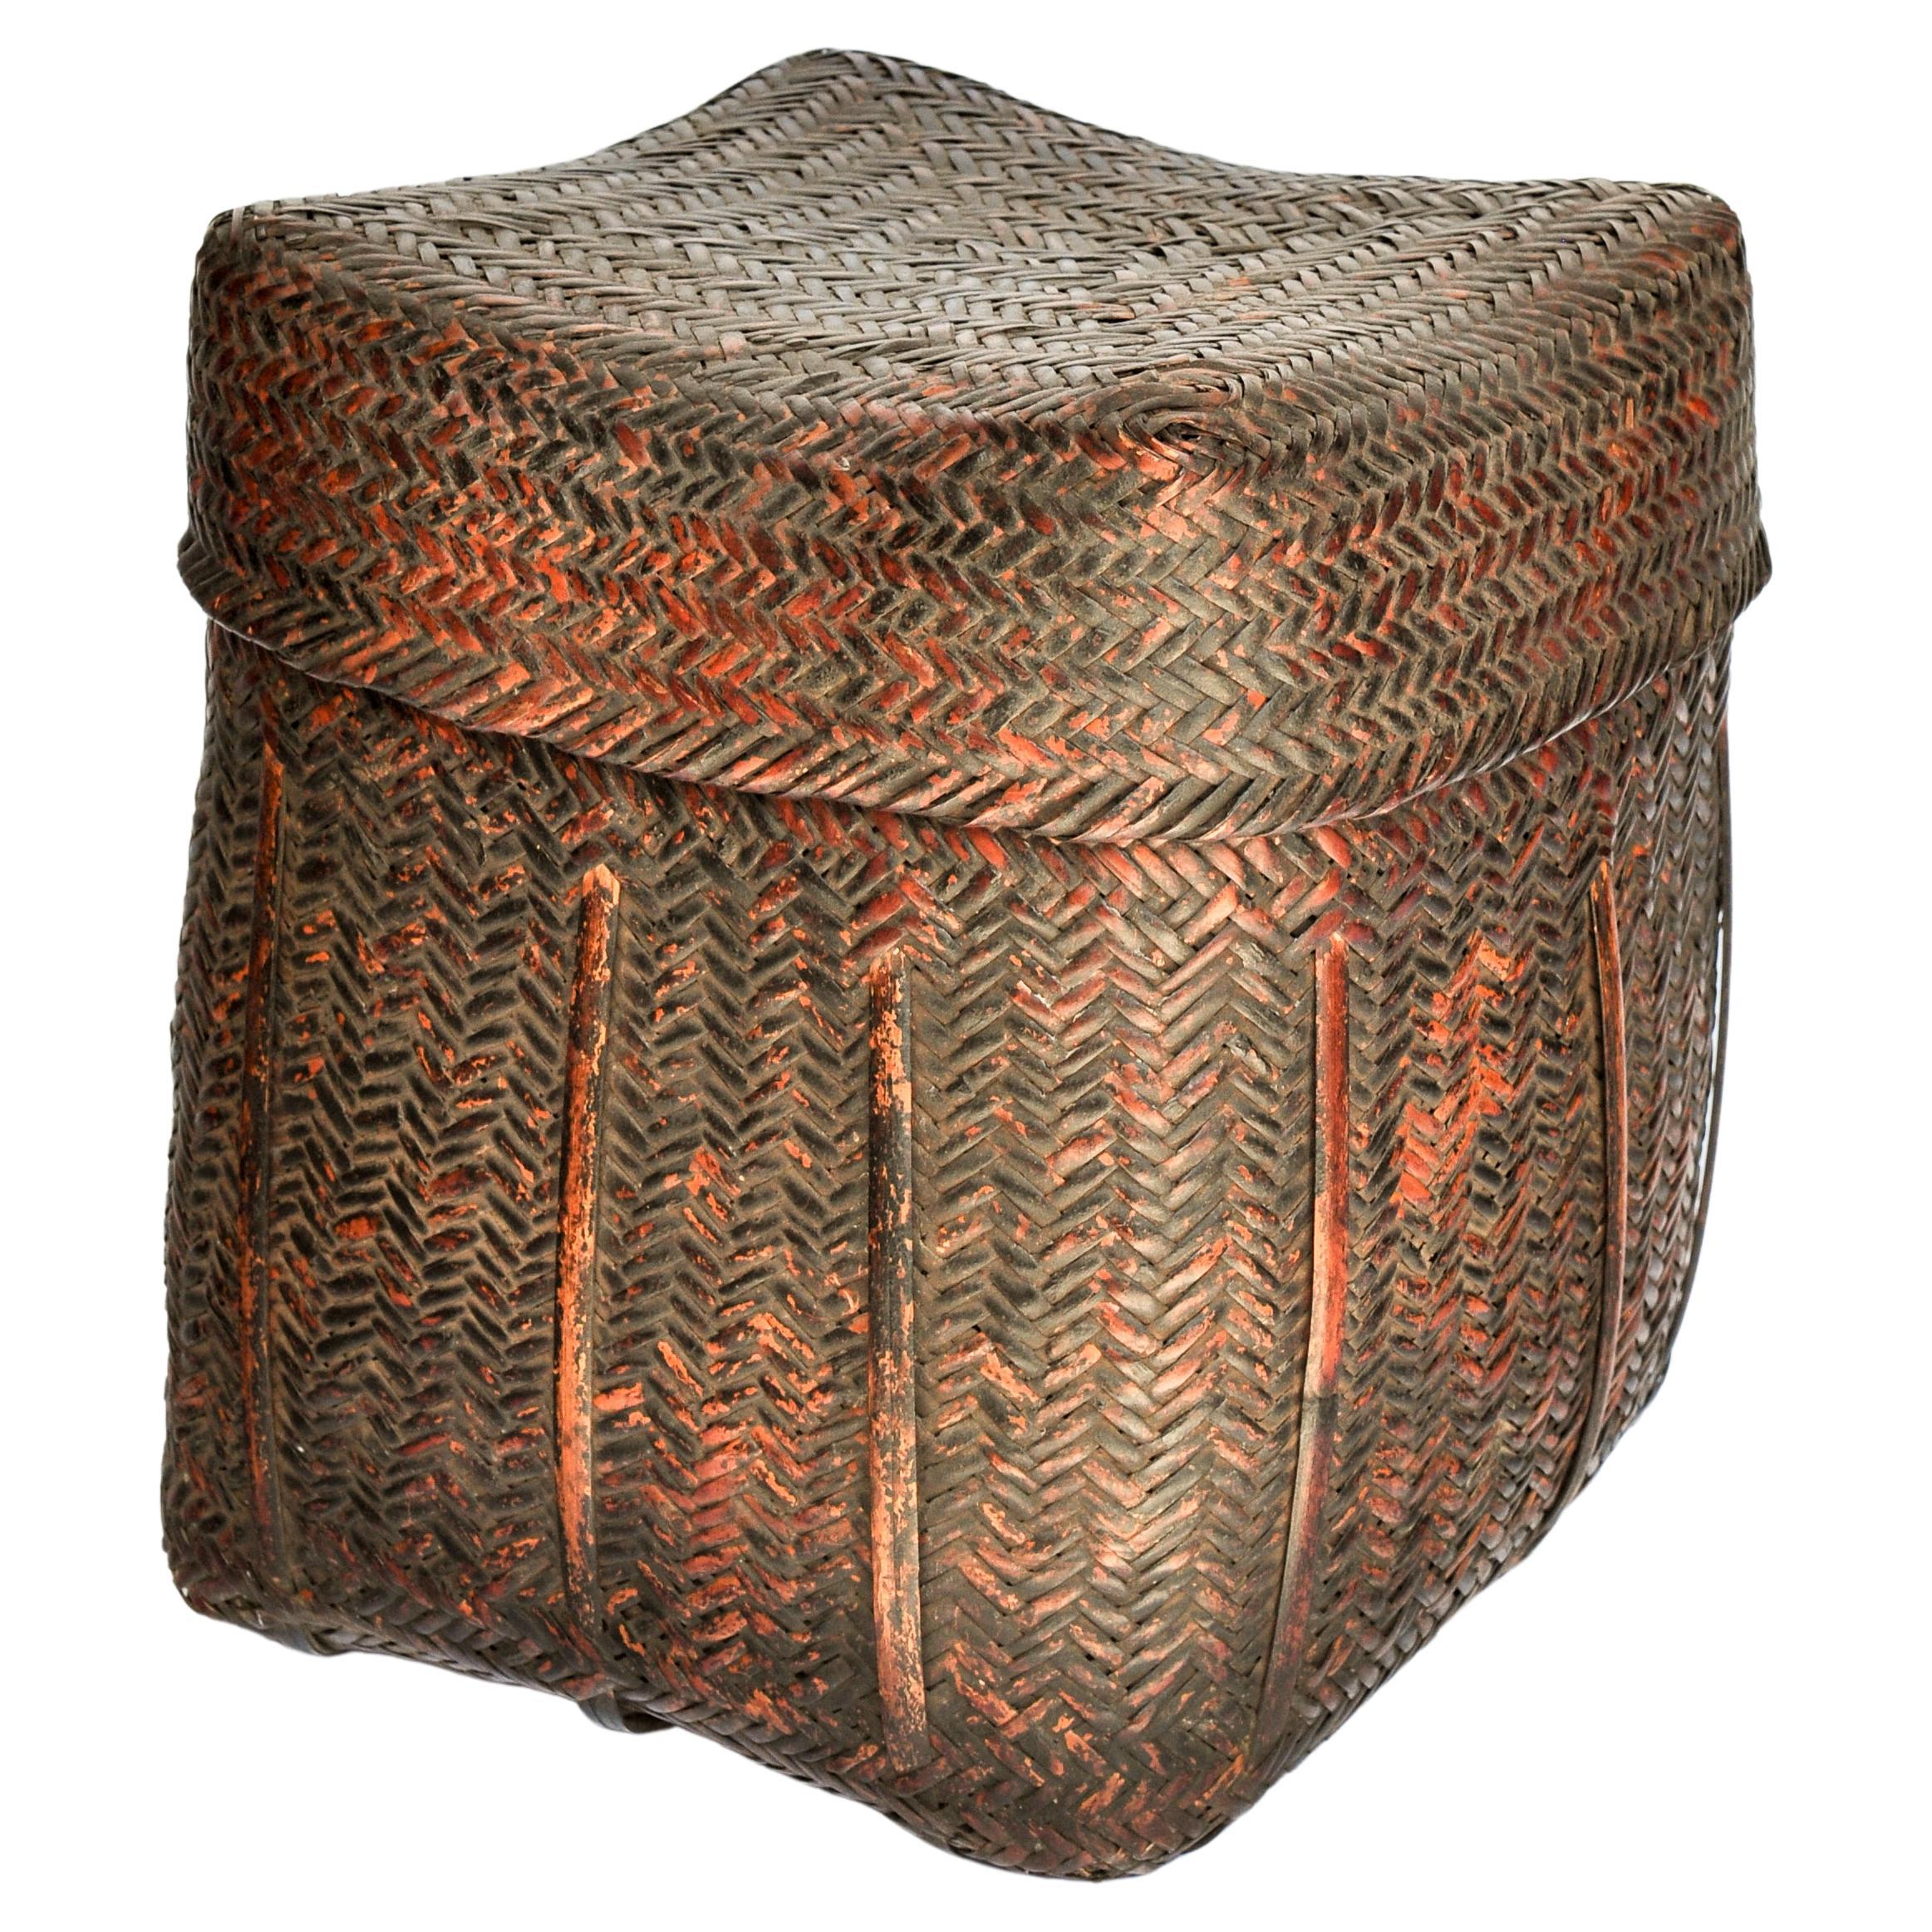 Rustic Tribal Storage Basket with Lid from the Tamang of Nepal, Mid-20th Century